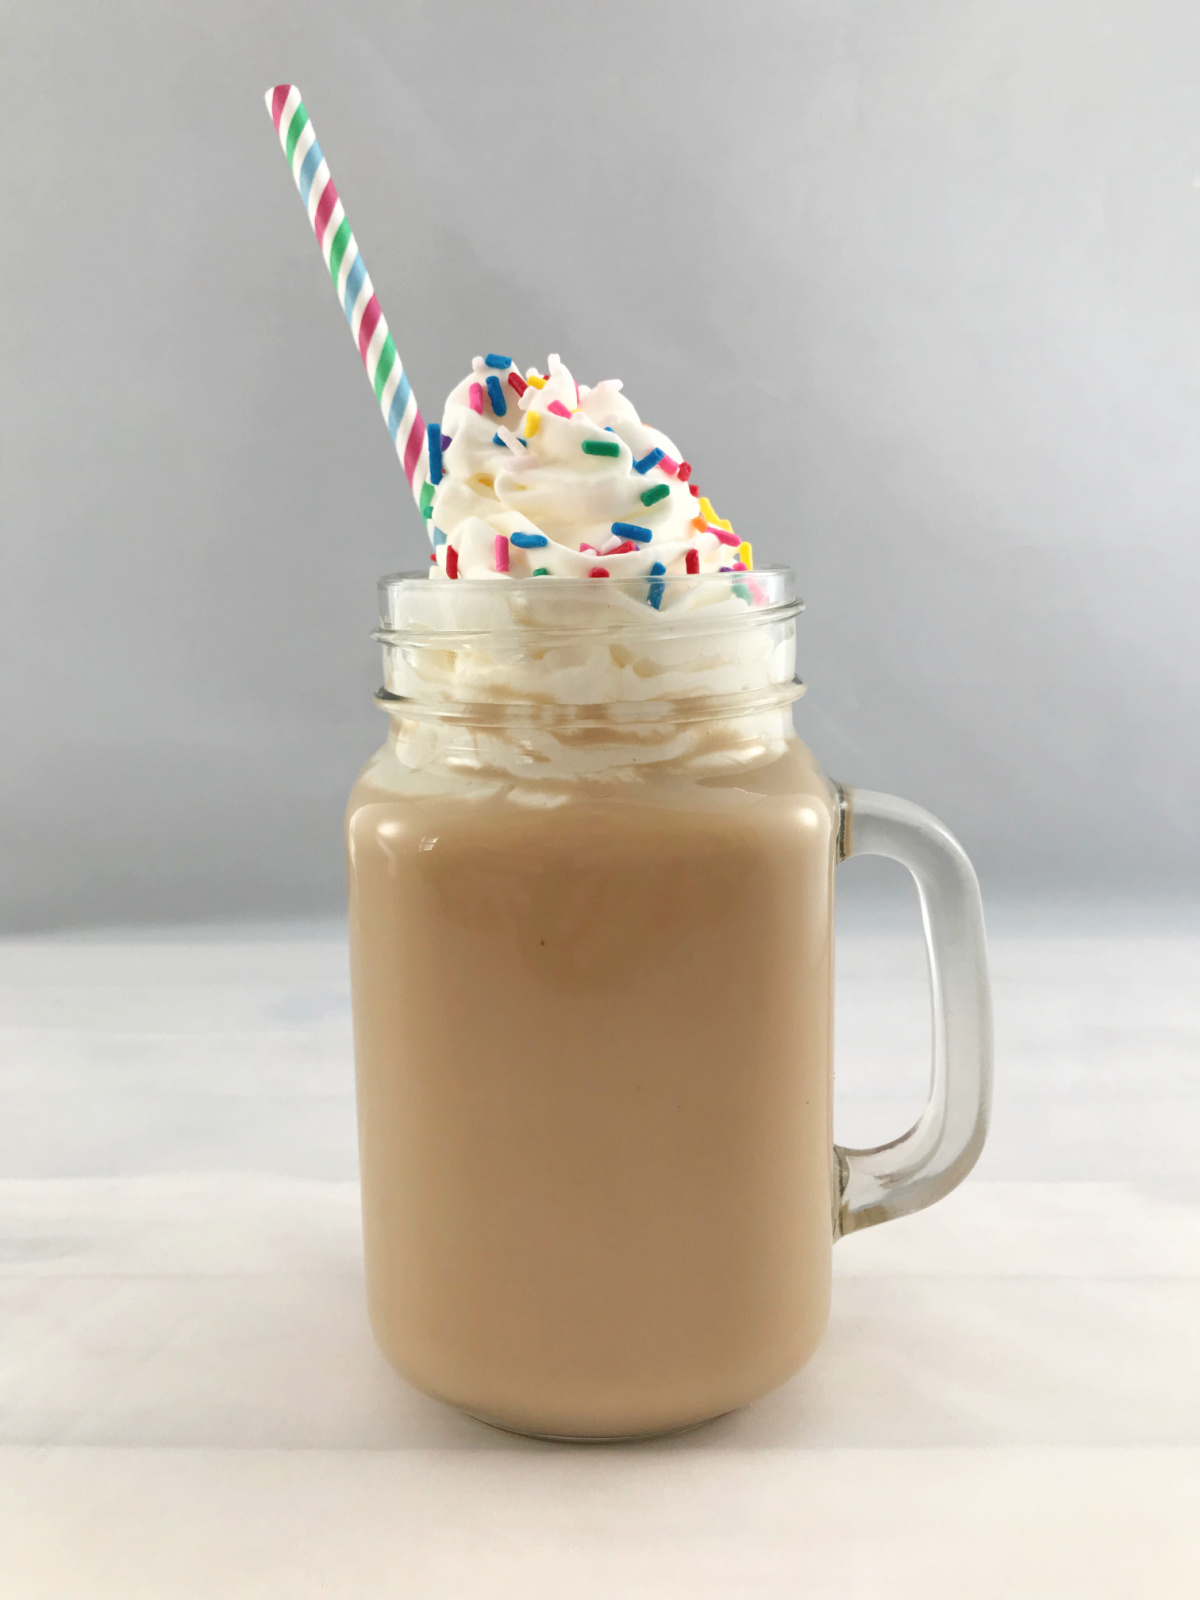 Iced Birthday Cake Latte in a glass mug with whipped cream and sprinkles.